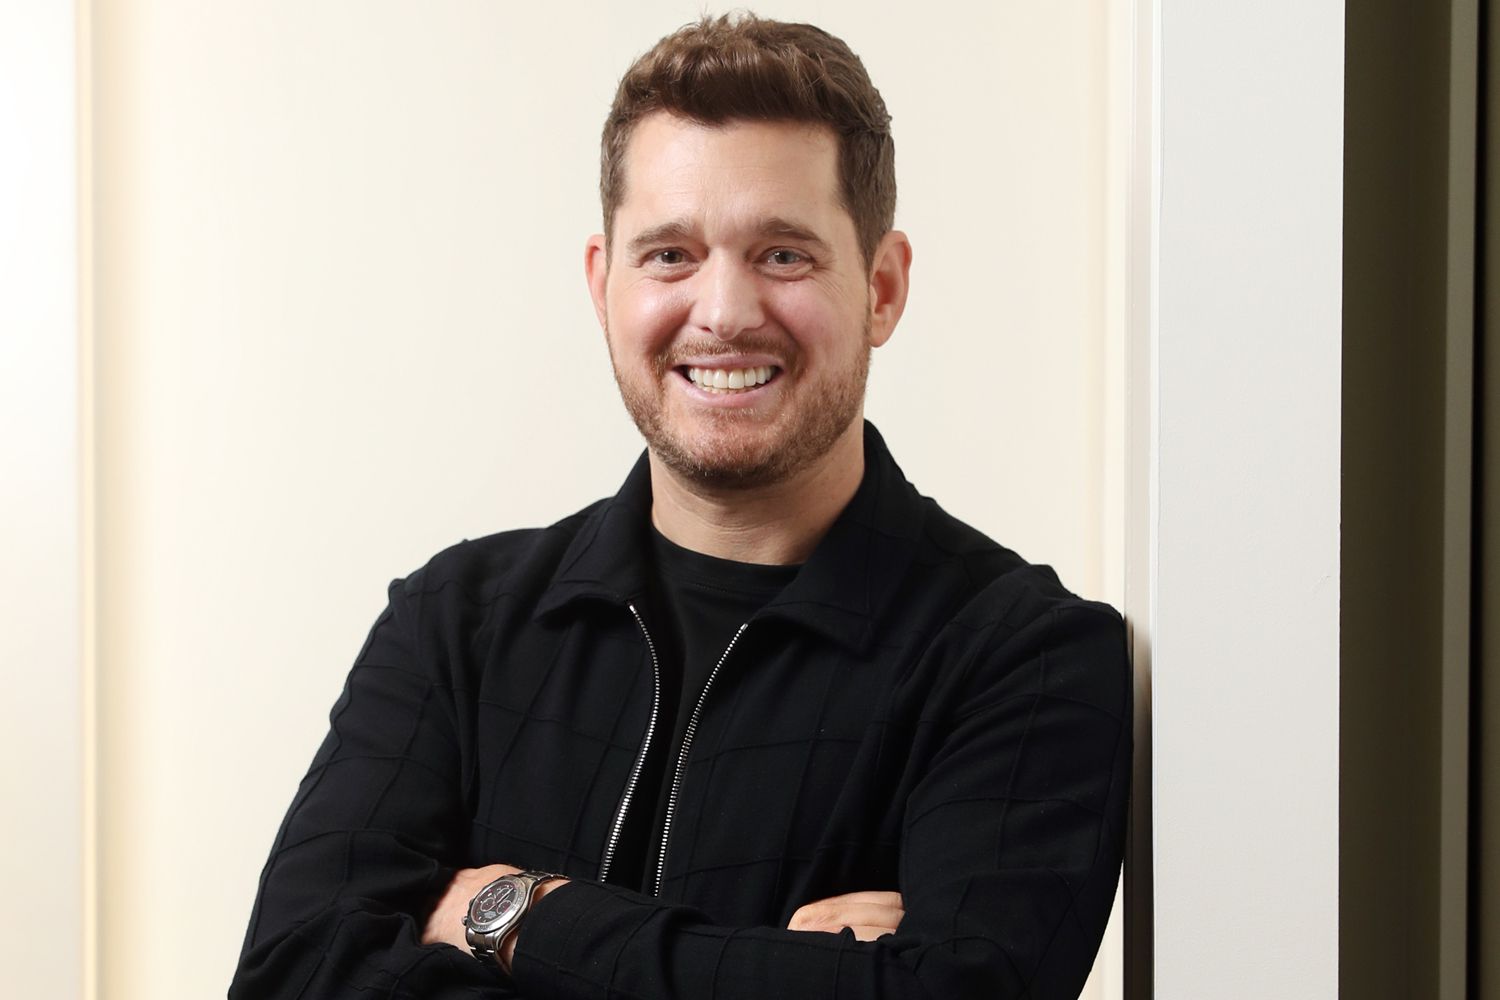 Michael Bublé Biography: Wife, Net Worth, Songs, Age, Family, Daughter Cancer, Height, Children